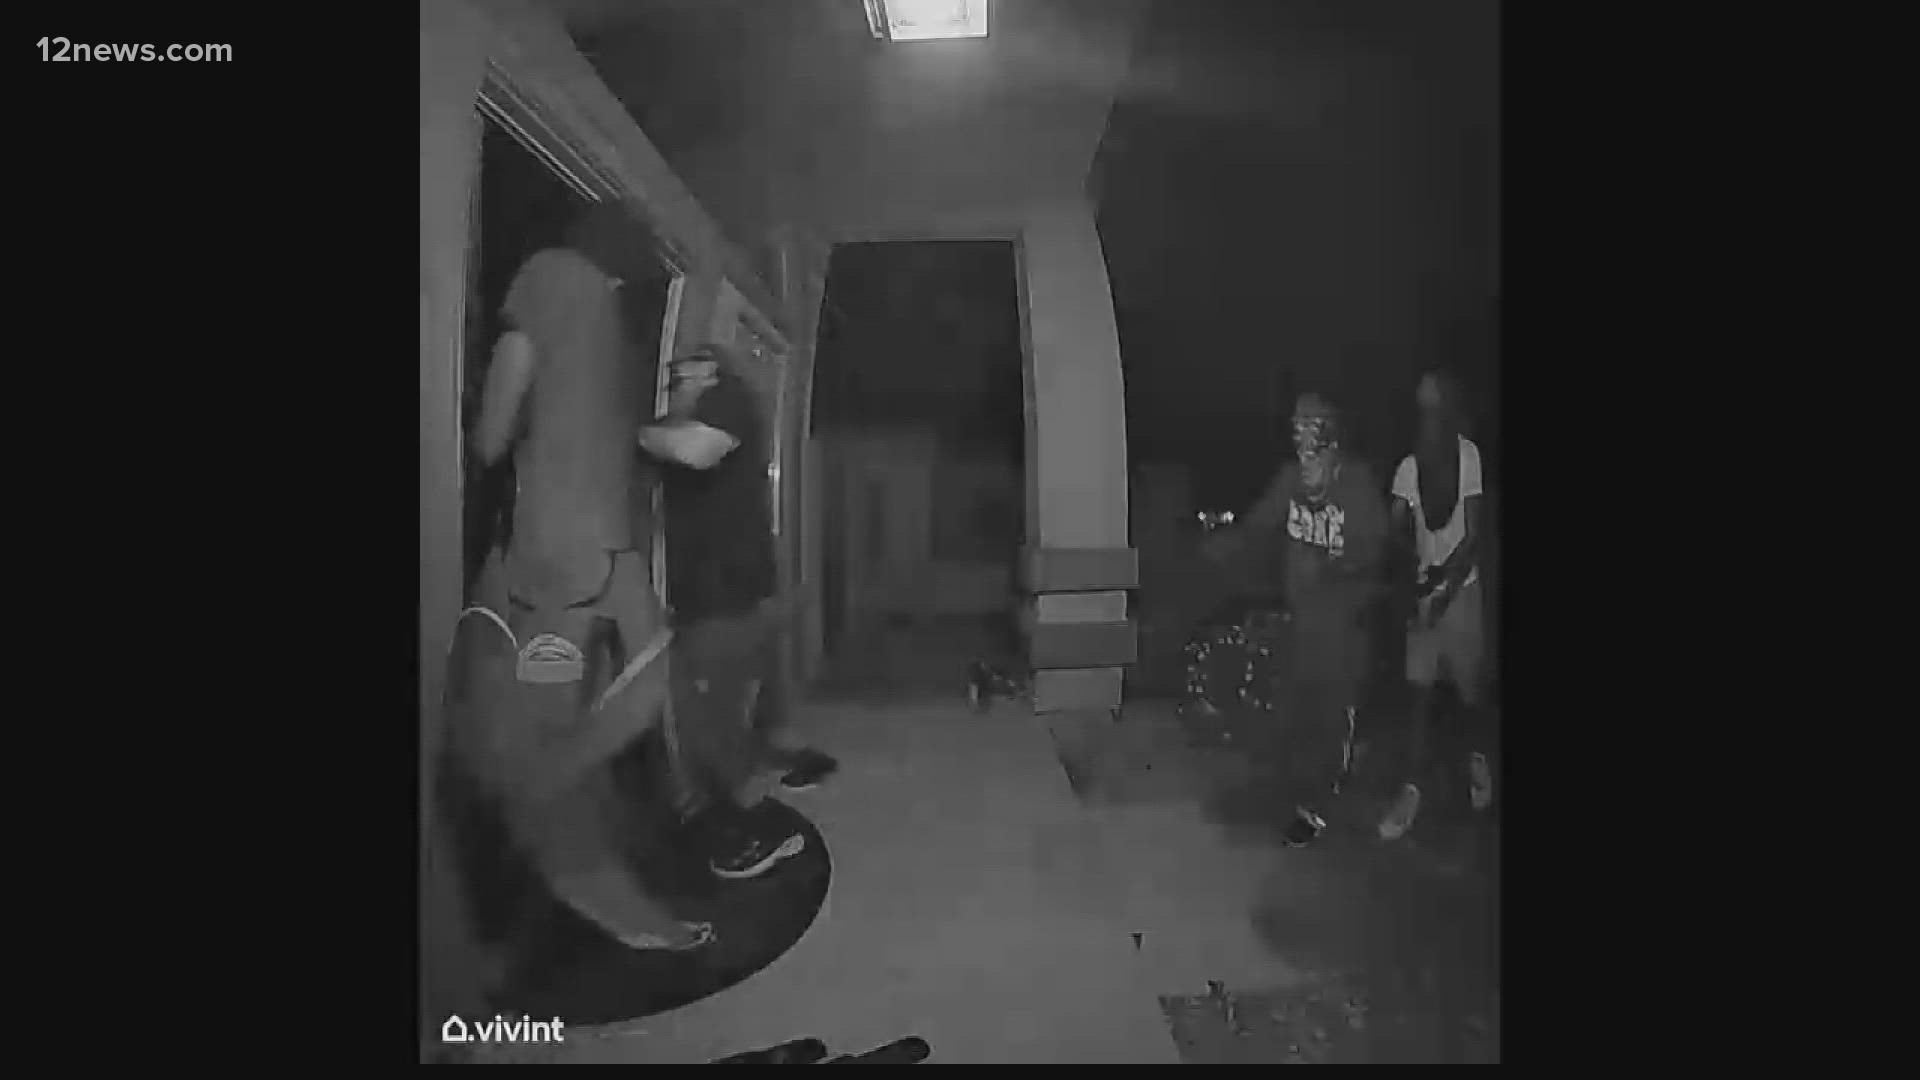 A Phoenix homeowner was seen on video shooting at suspects who were trying to break into a home, and police are asking for tips to find them.